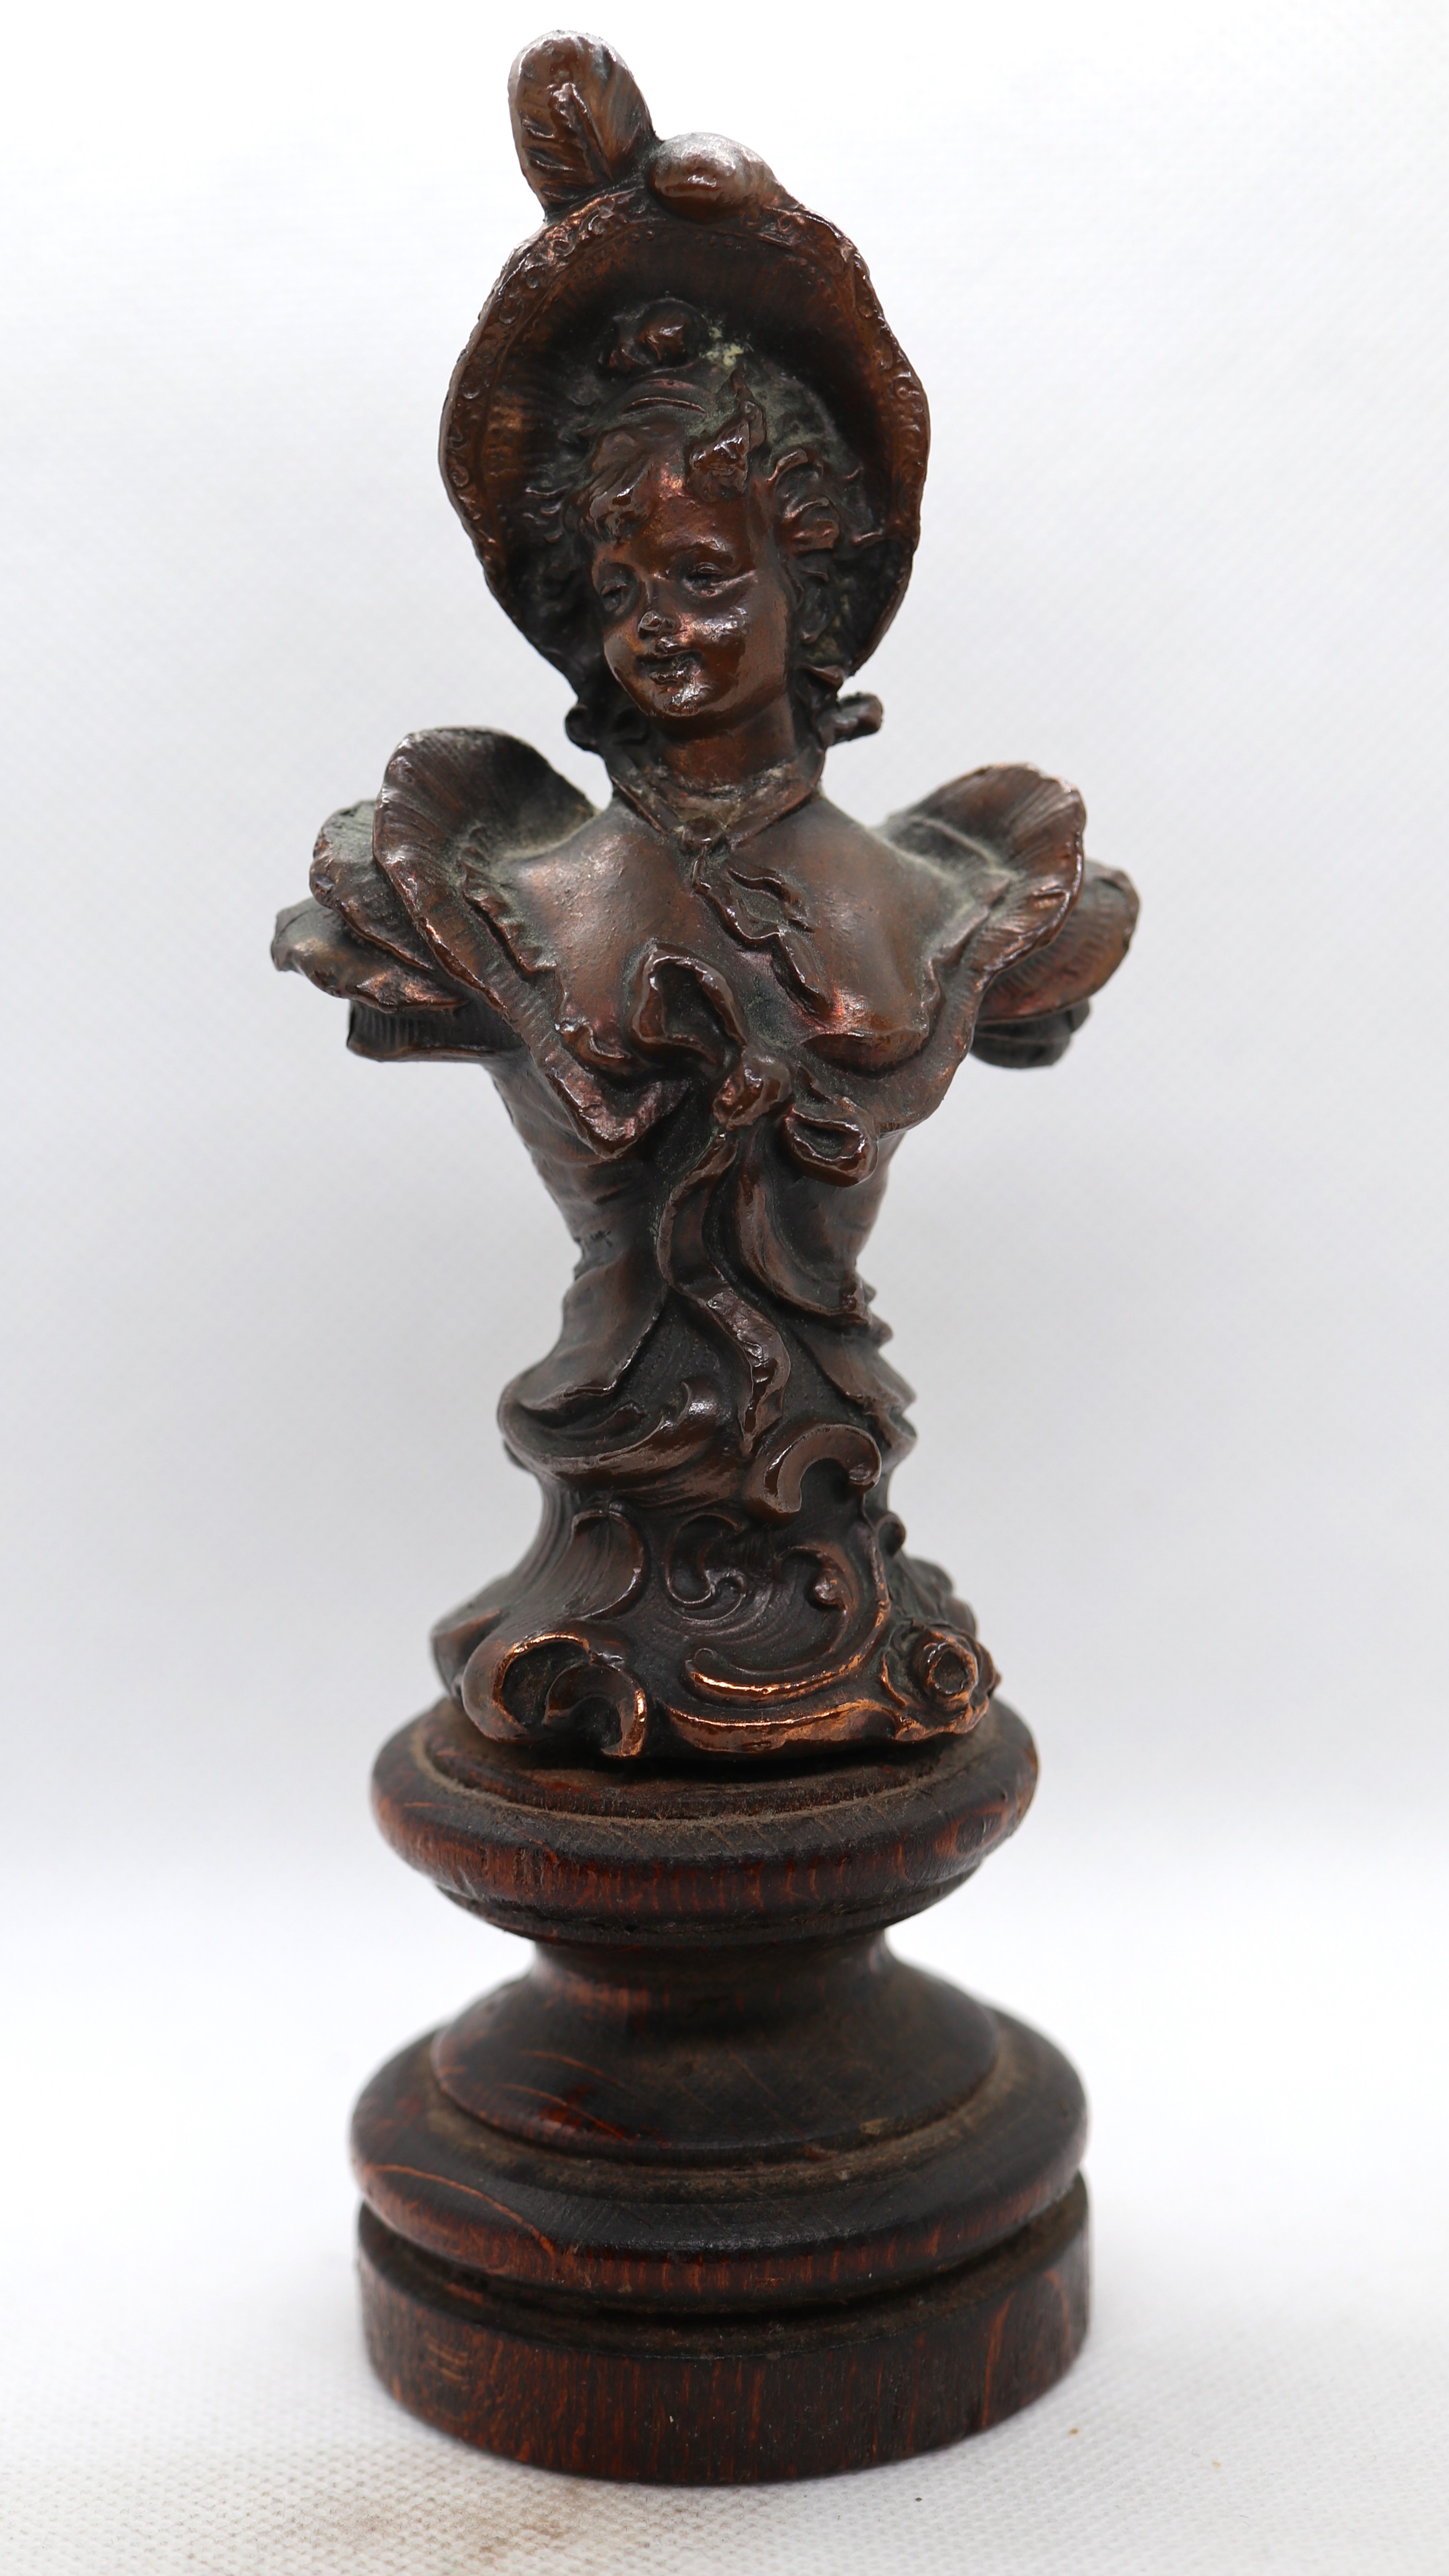 2 bronze busts 1 of Napoleon and the other of a young lady in a bonnet - Image 4 of 4